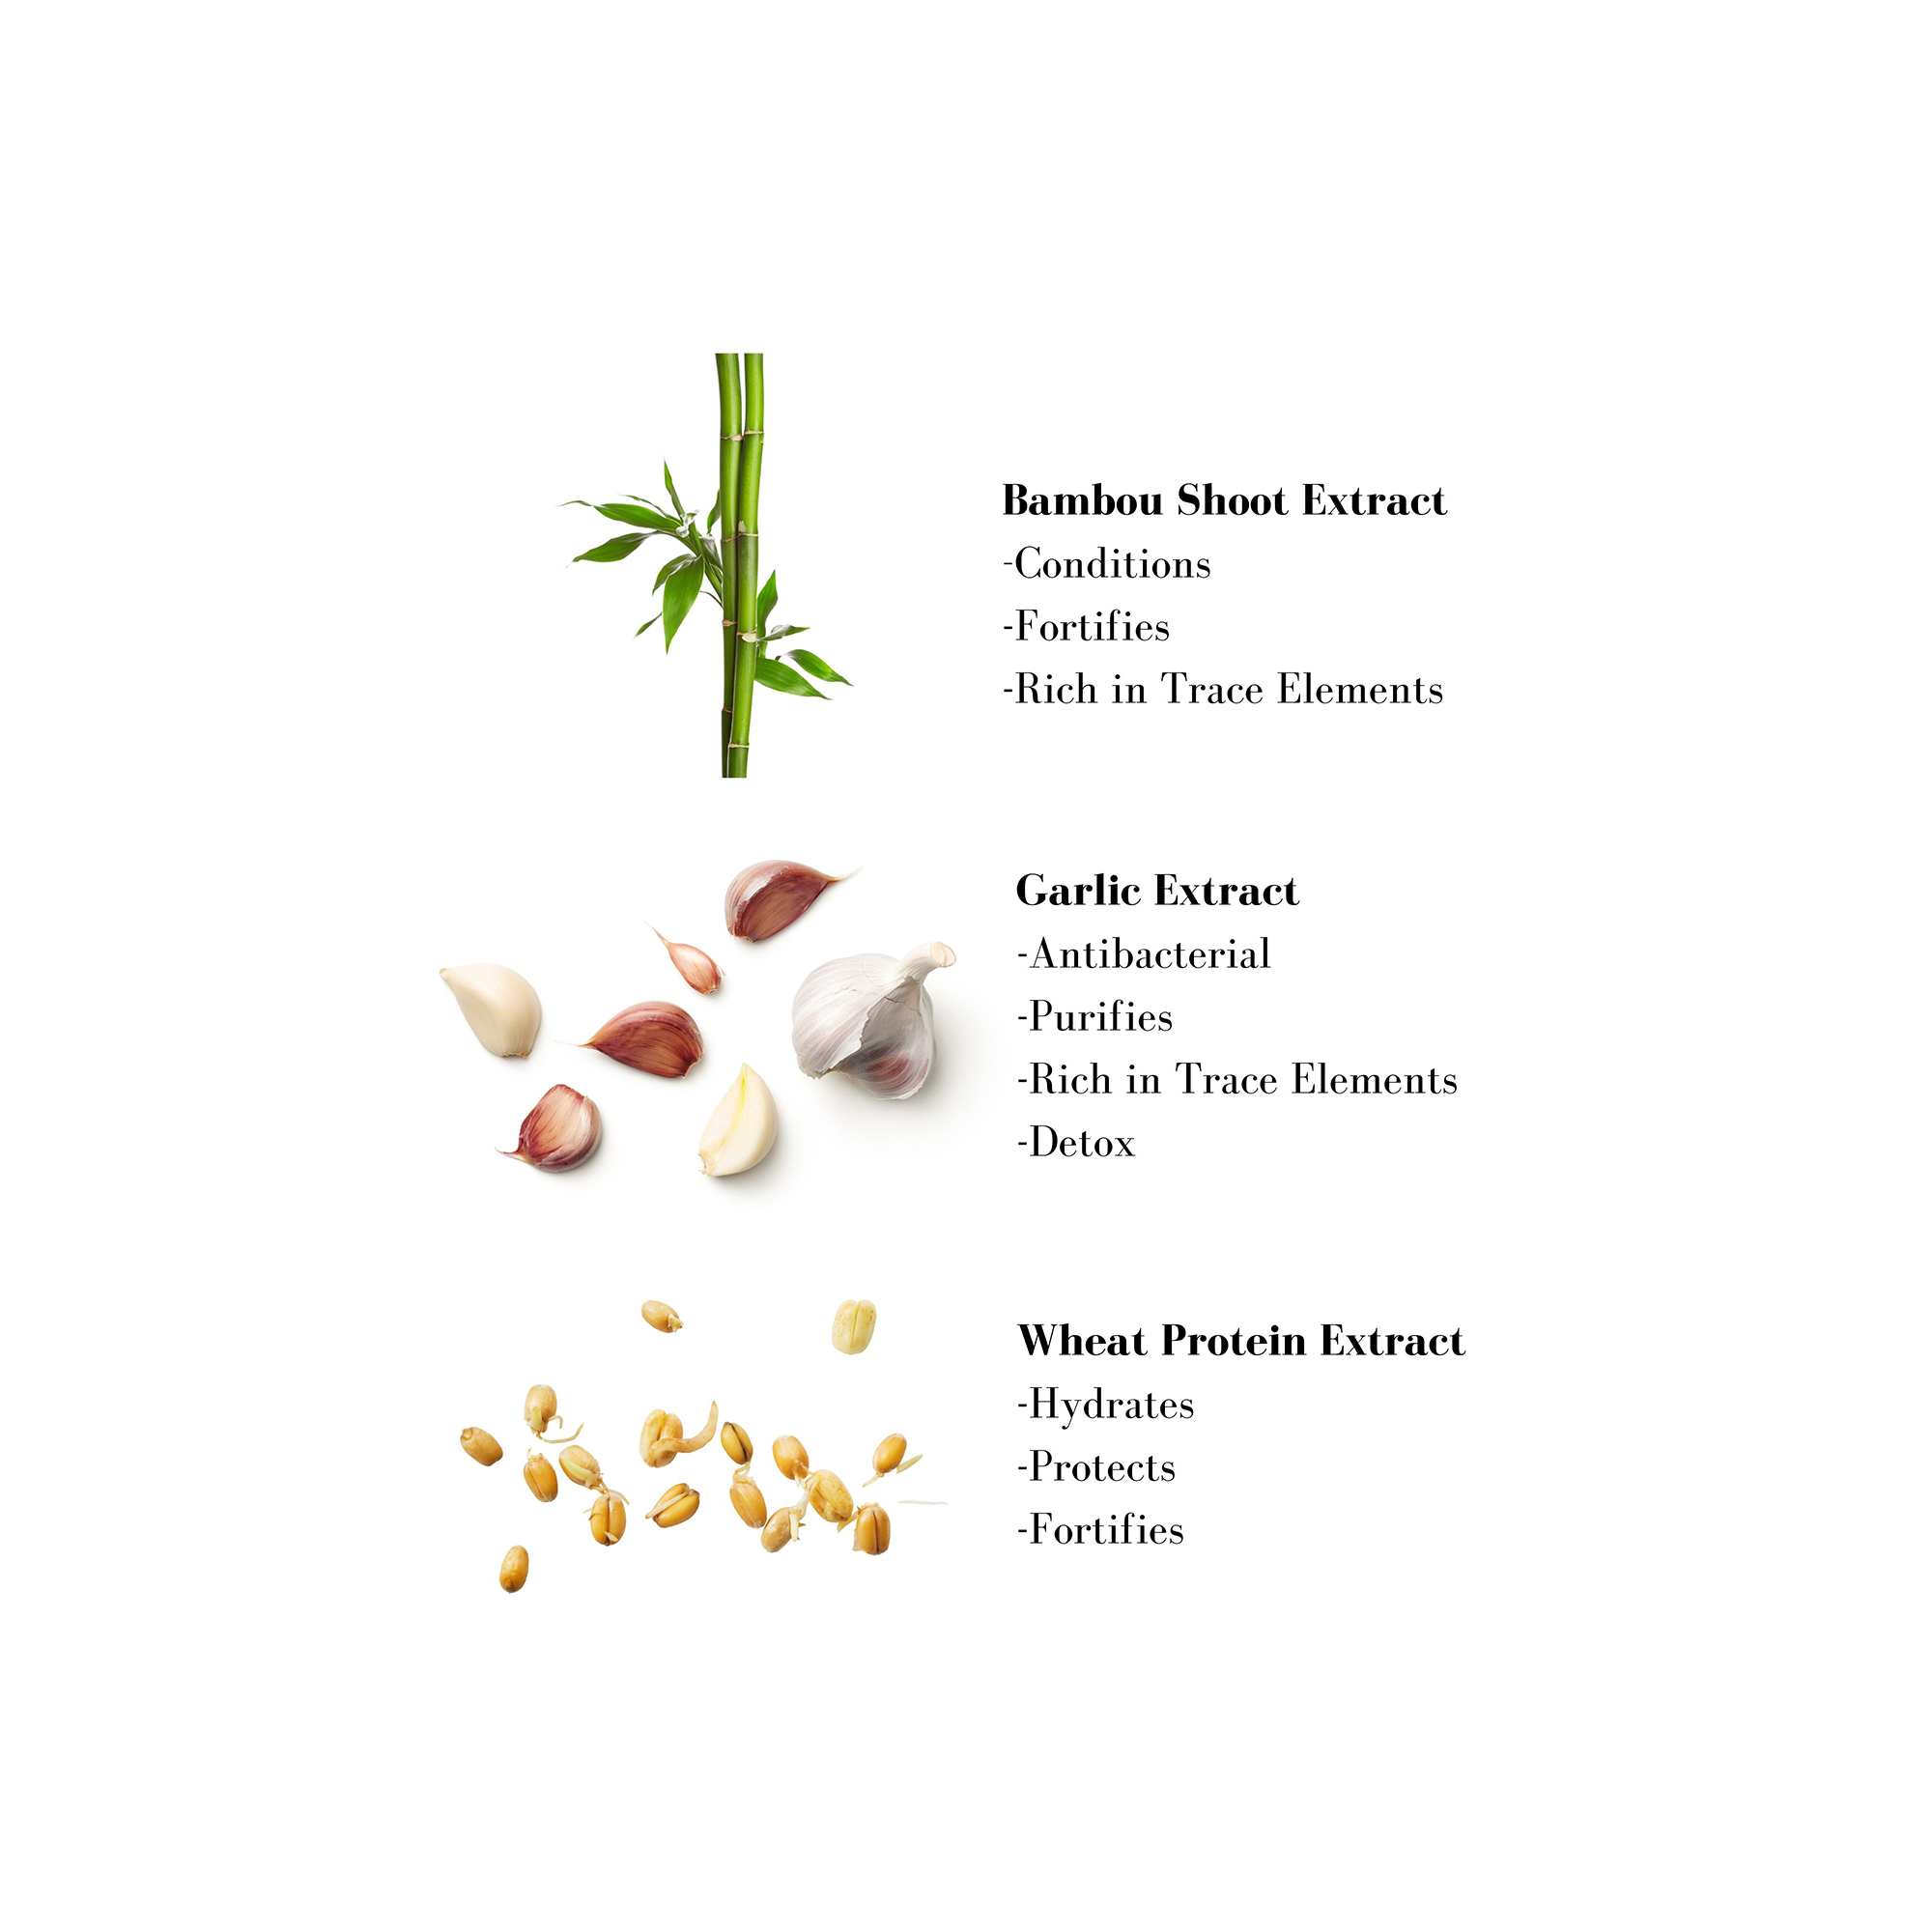 Image 1- Bambou Shoot Extract -Conditions -Fortifies -Rich in Trace Elements Garlic Extract -Antibacterial -Purifies -Rich in Trace Elements -Detox Wheat Protein Extract -Hydrates -Protects -Fortifies